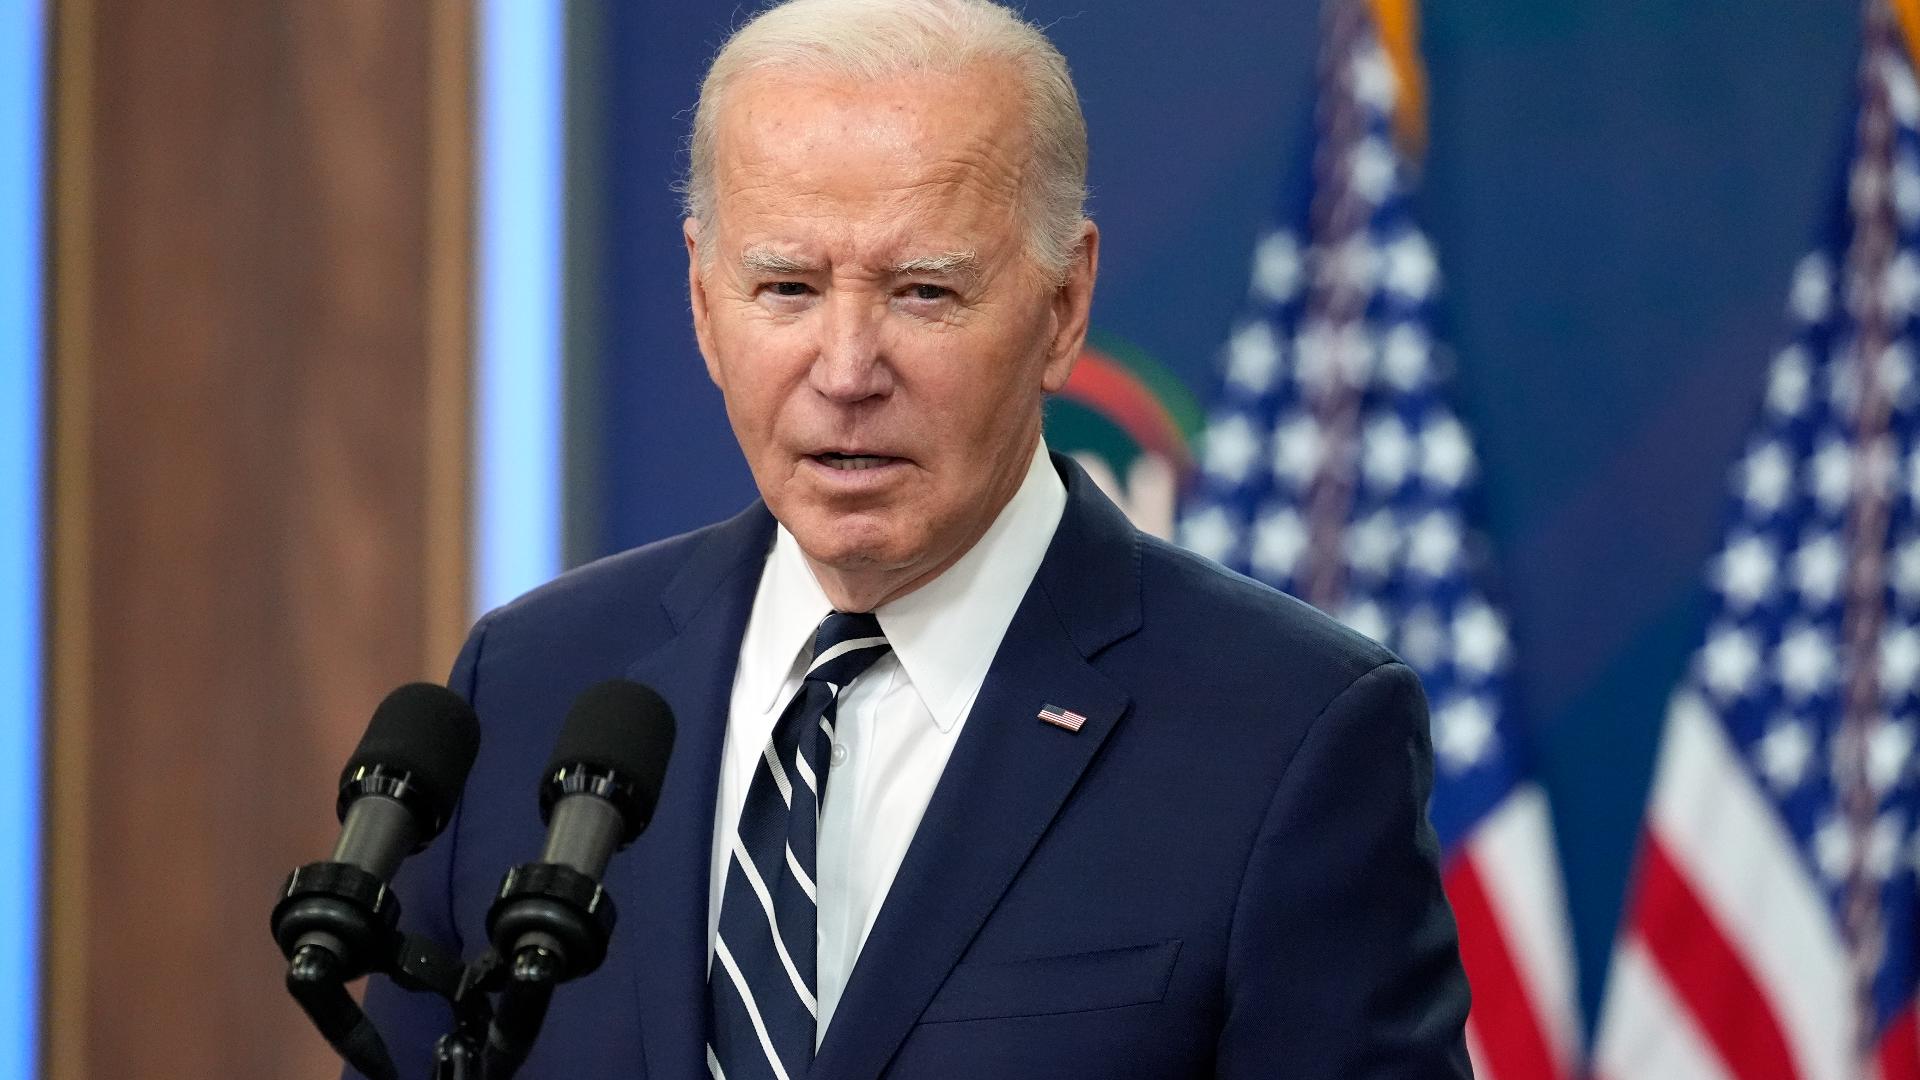 Legislation needs only to move the state's Aug. 7 ballot deadline so that it falls after the Democratic National Convention where Biden will be formally nominated.